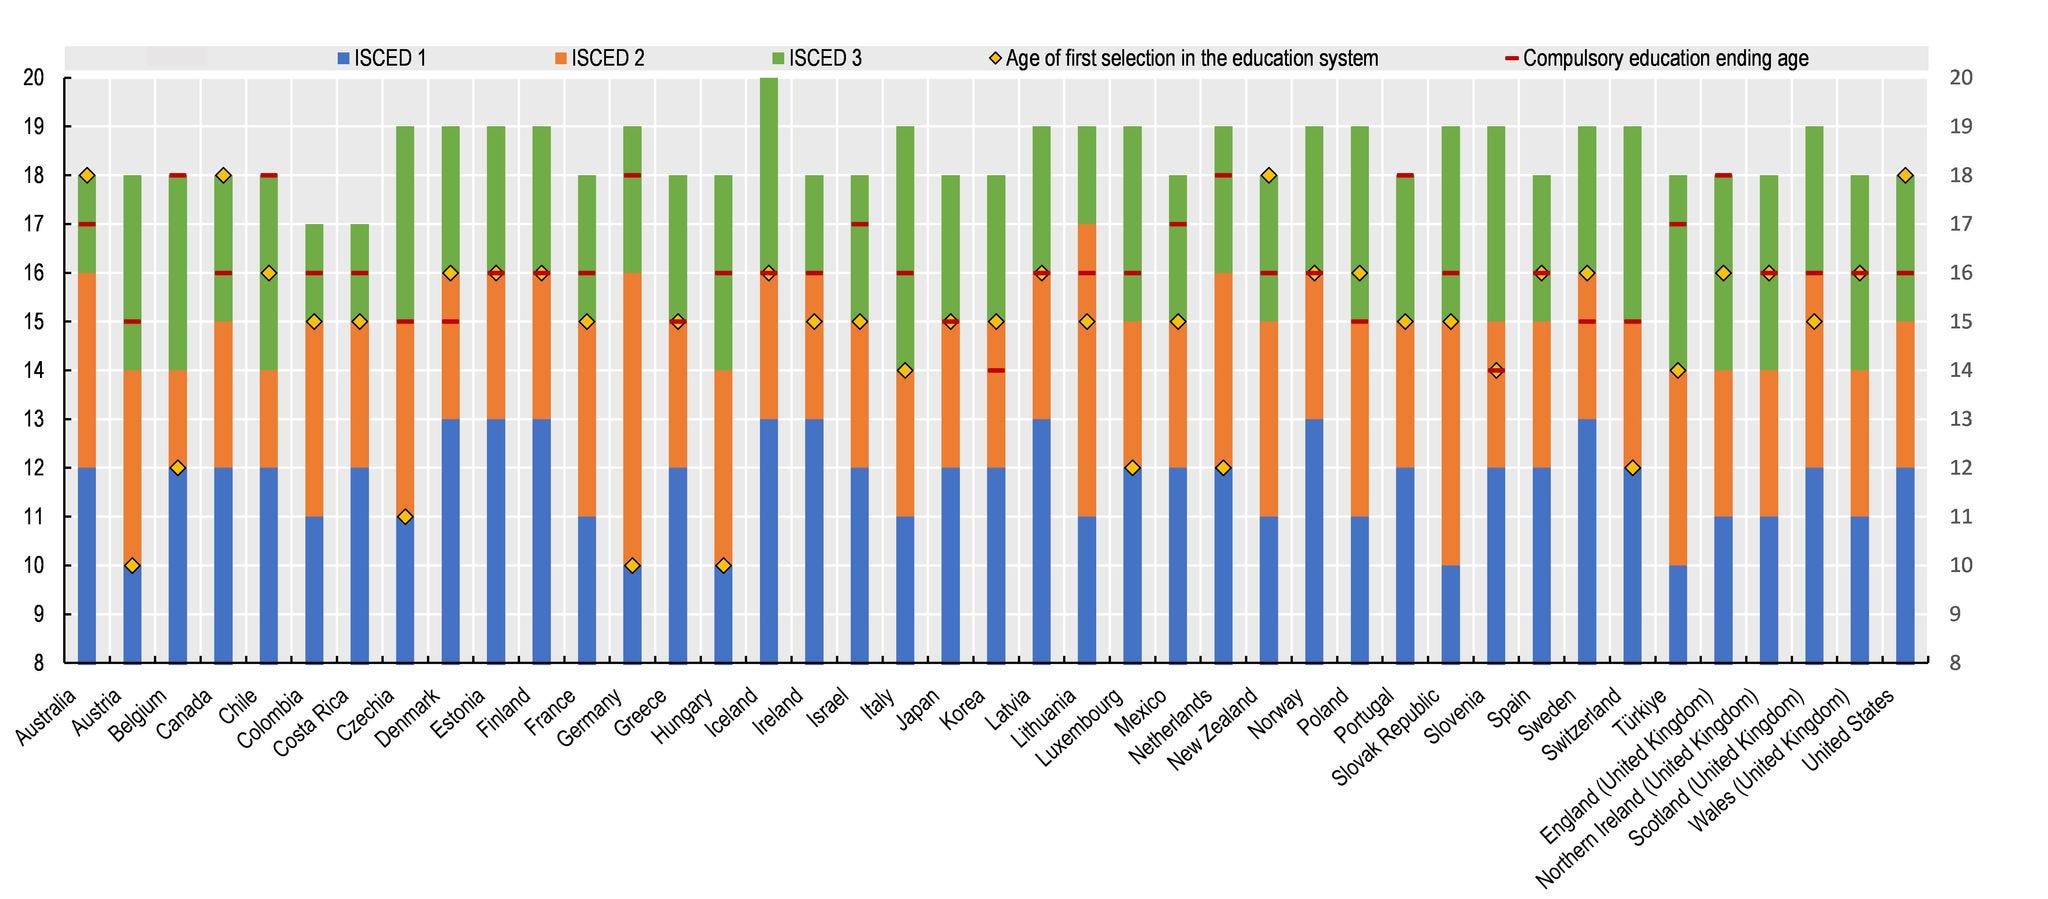 Upper secondary education systems across OECD countries